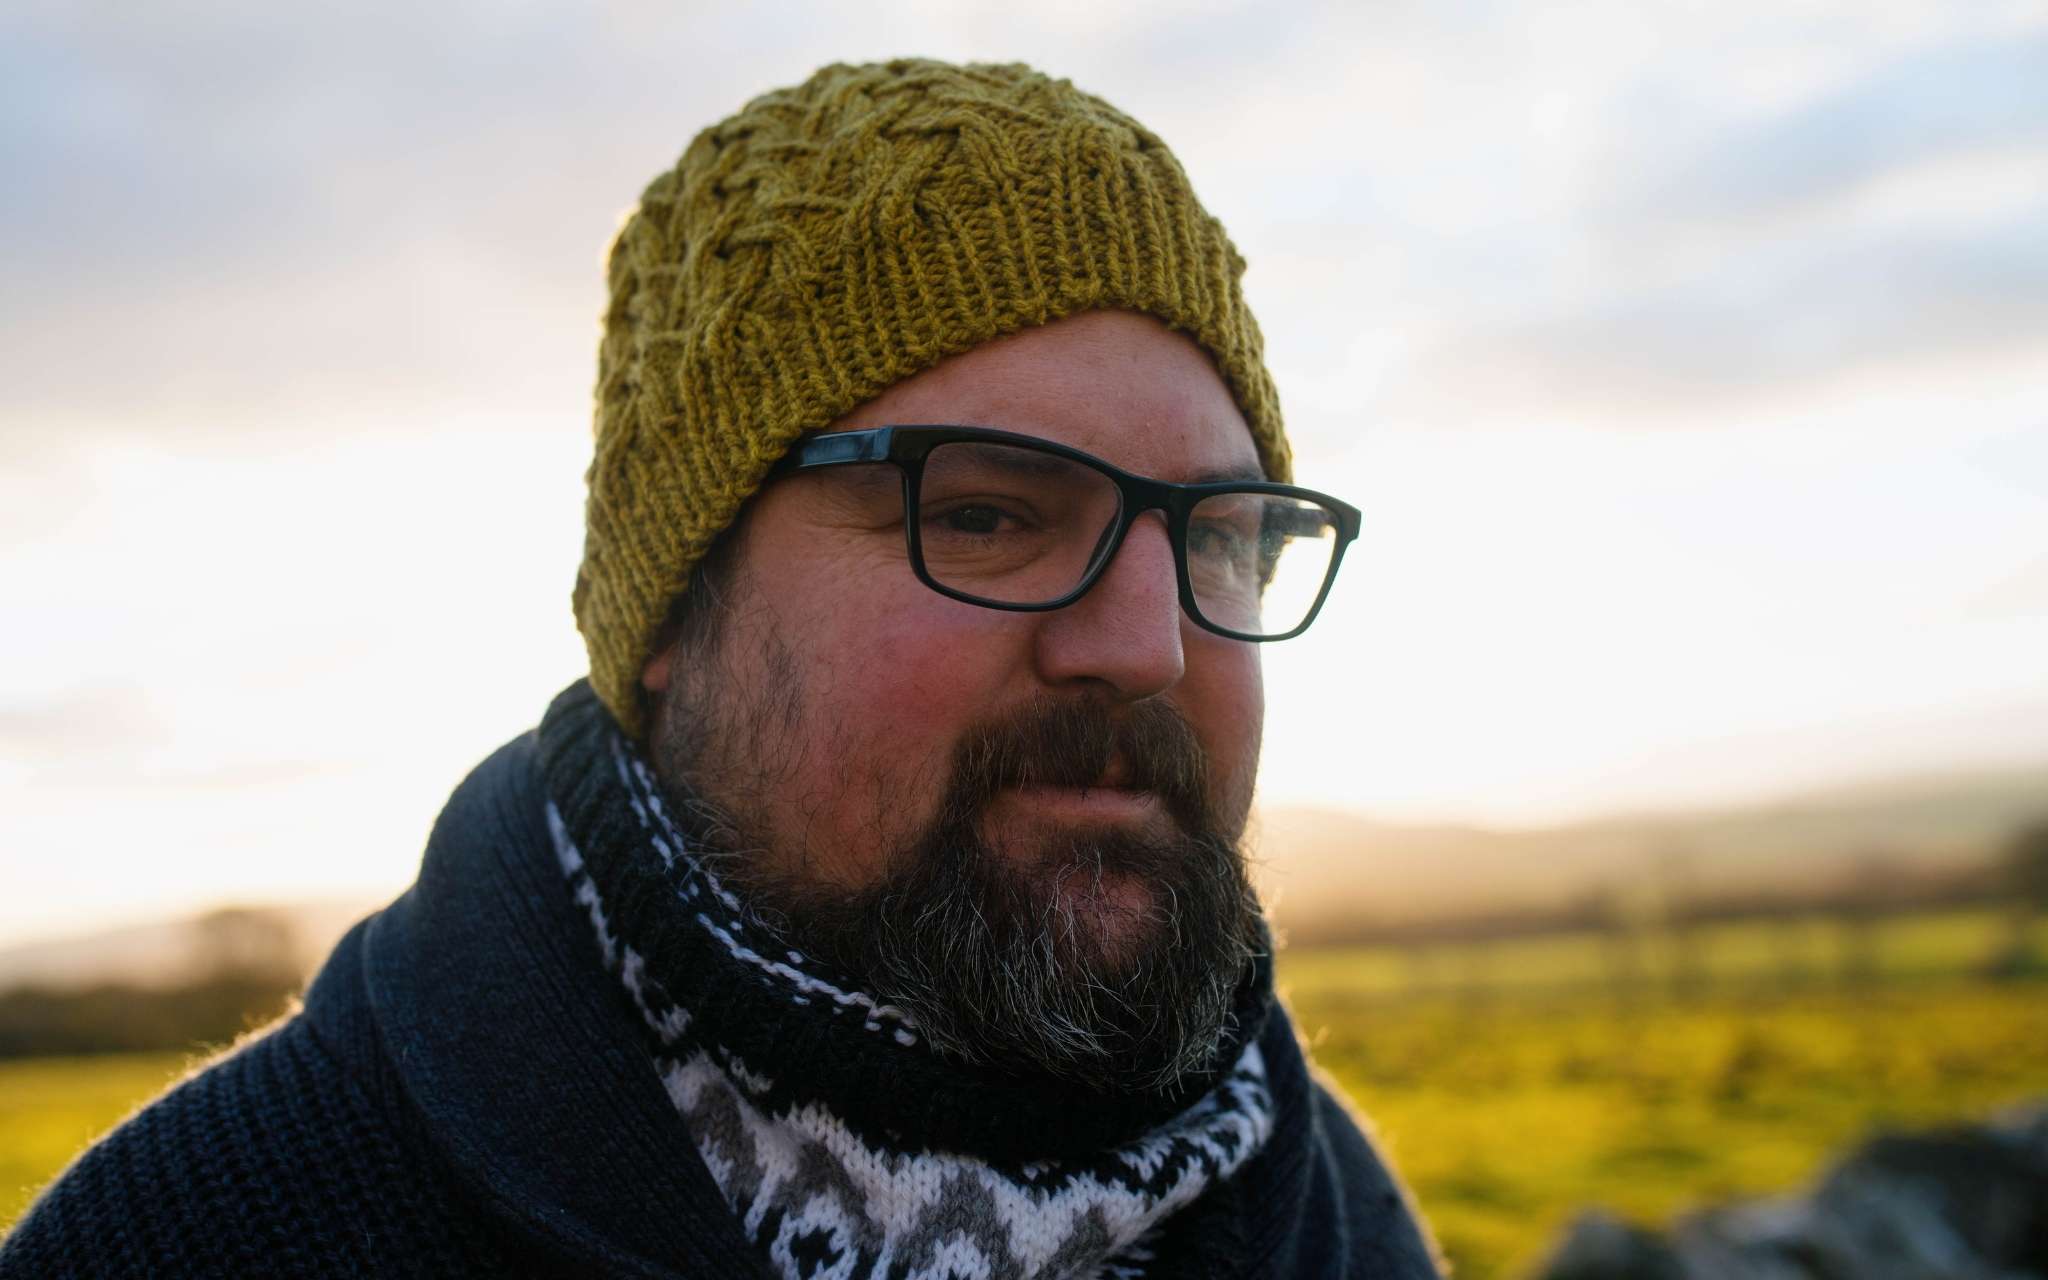 A white man with a beard and glasses stands in a rural landscape, looking to the right. He is wearing a green cabled beanie hat and colourwork cowl.